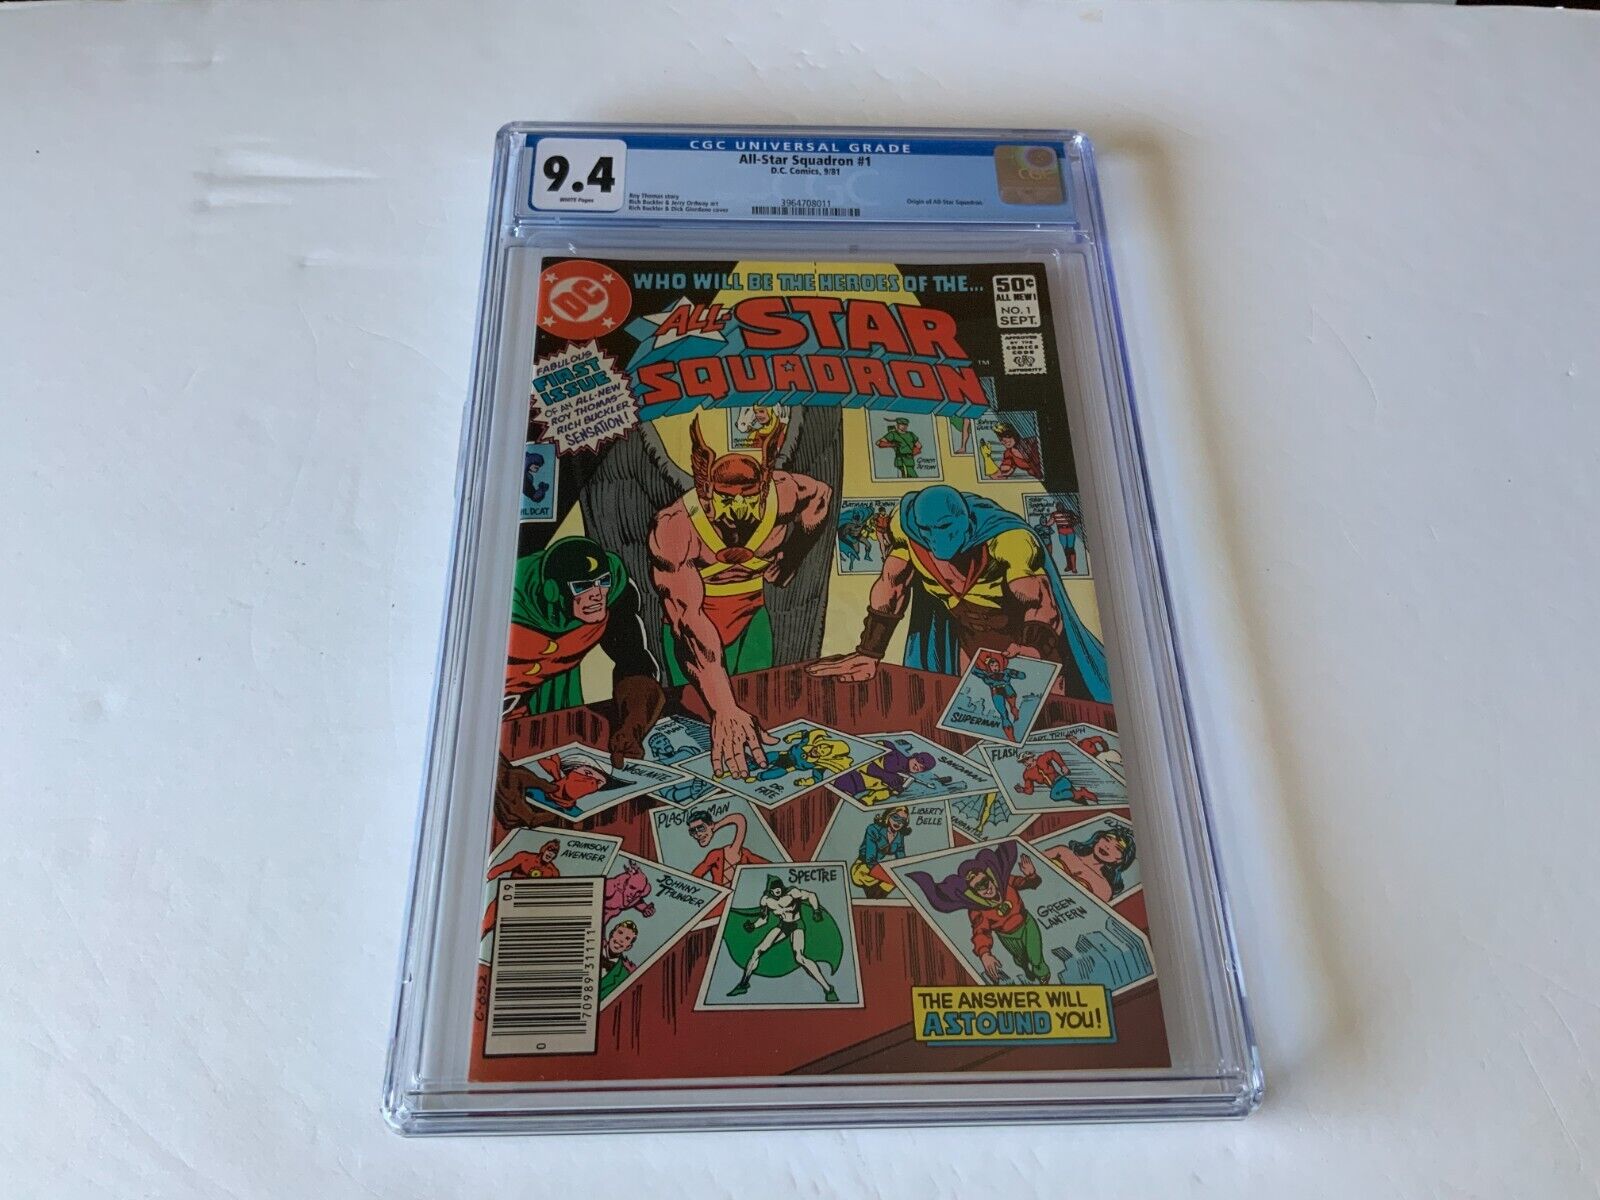 ALL STAR SQUADRON 1 CGC 9.4 NEWSSTAND WHITE PAGES ORIGIN DC COMIC 1981 BT